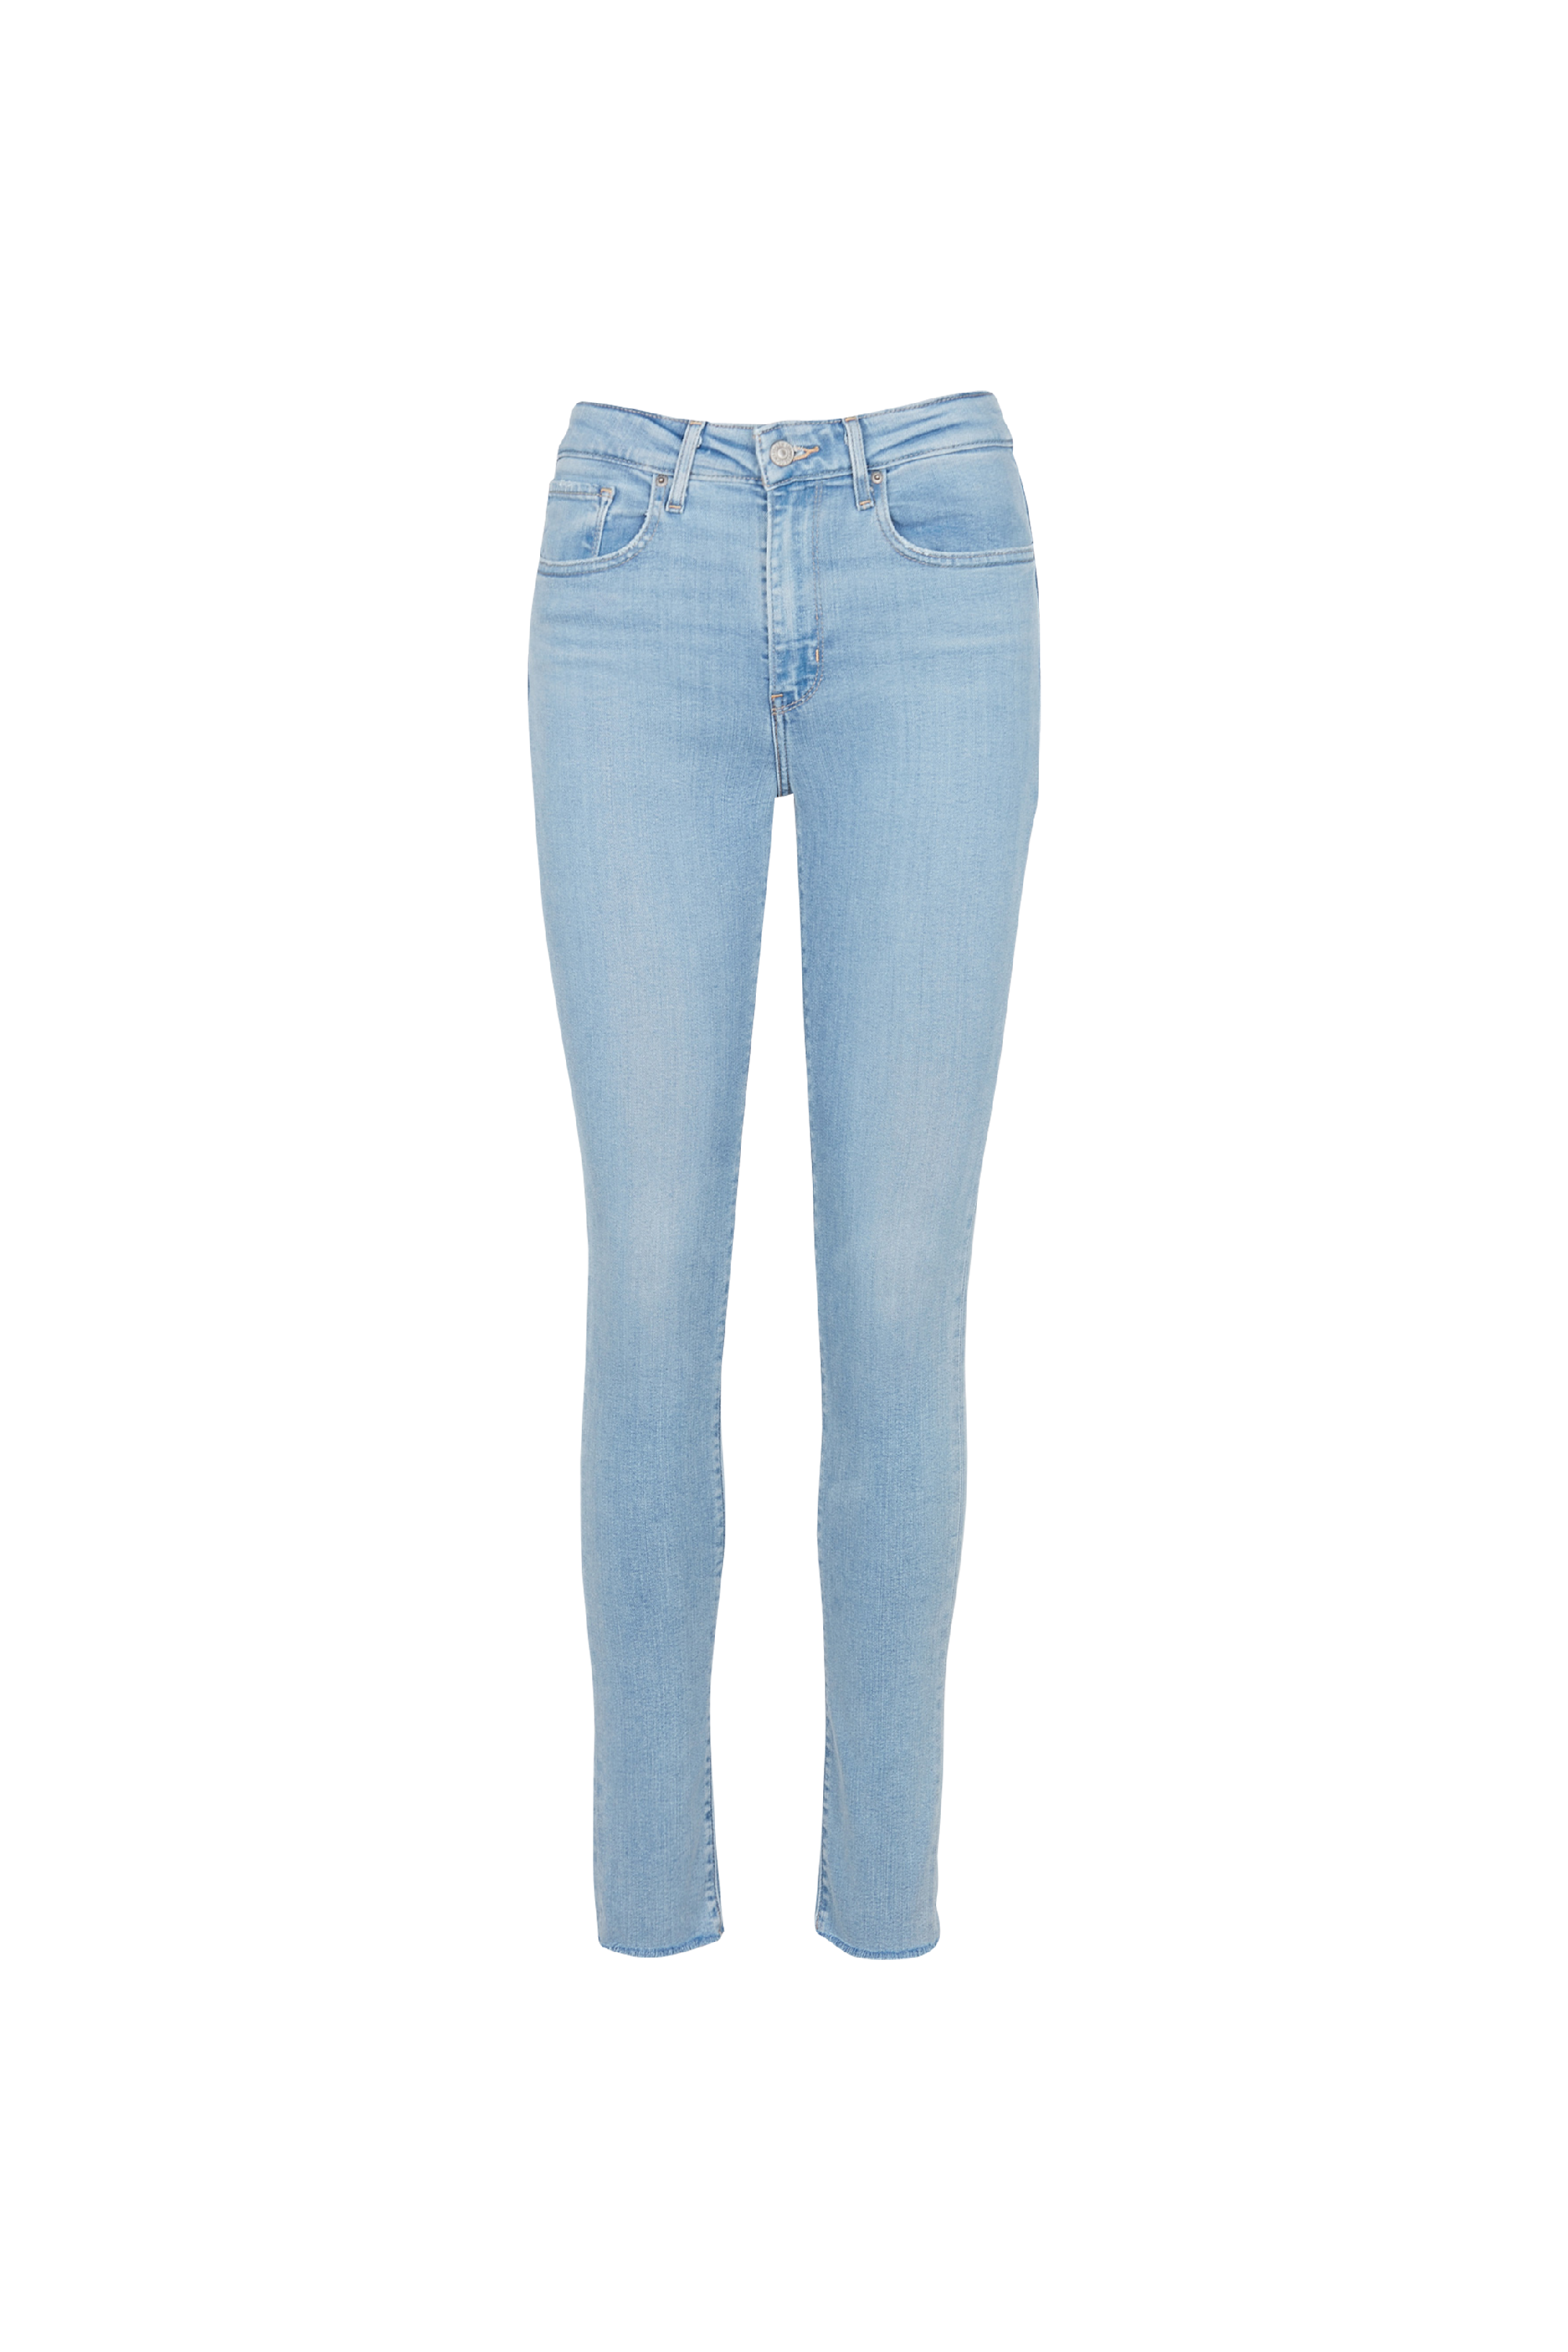 Levi's - Jean skinny taille haute - Taille 25/32